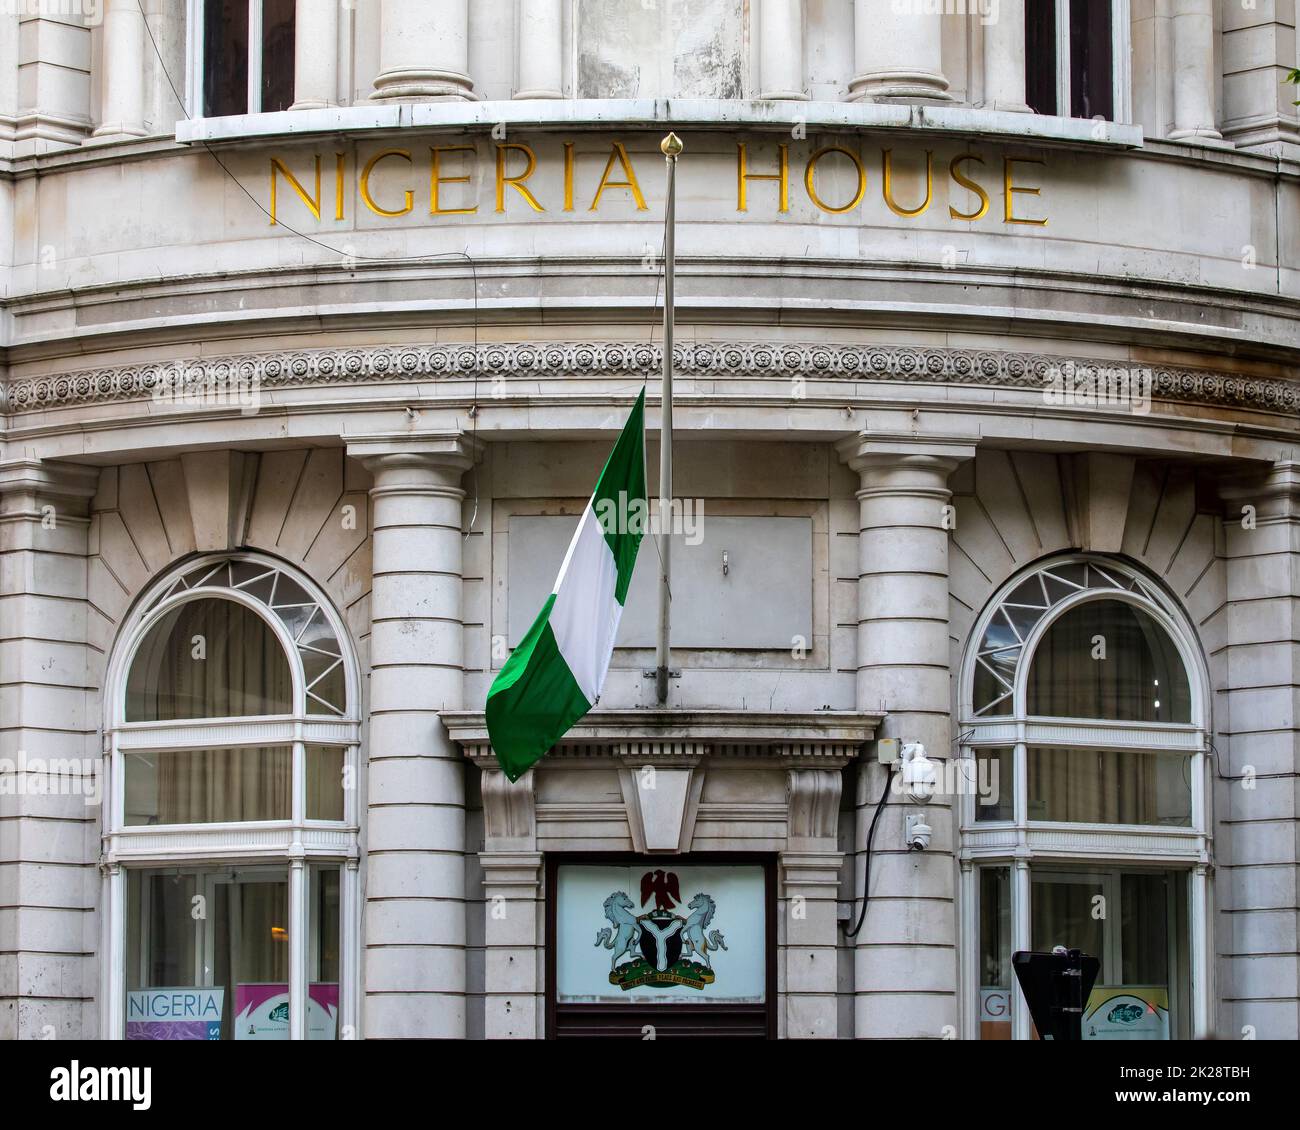 London, UK - September 14th 2022: The exterior of Nigeria House, the home of the Nigeria High Commission, on Northumberland Avenue in London, UK. Stock Photo